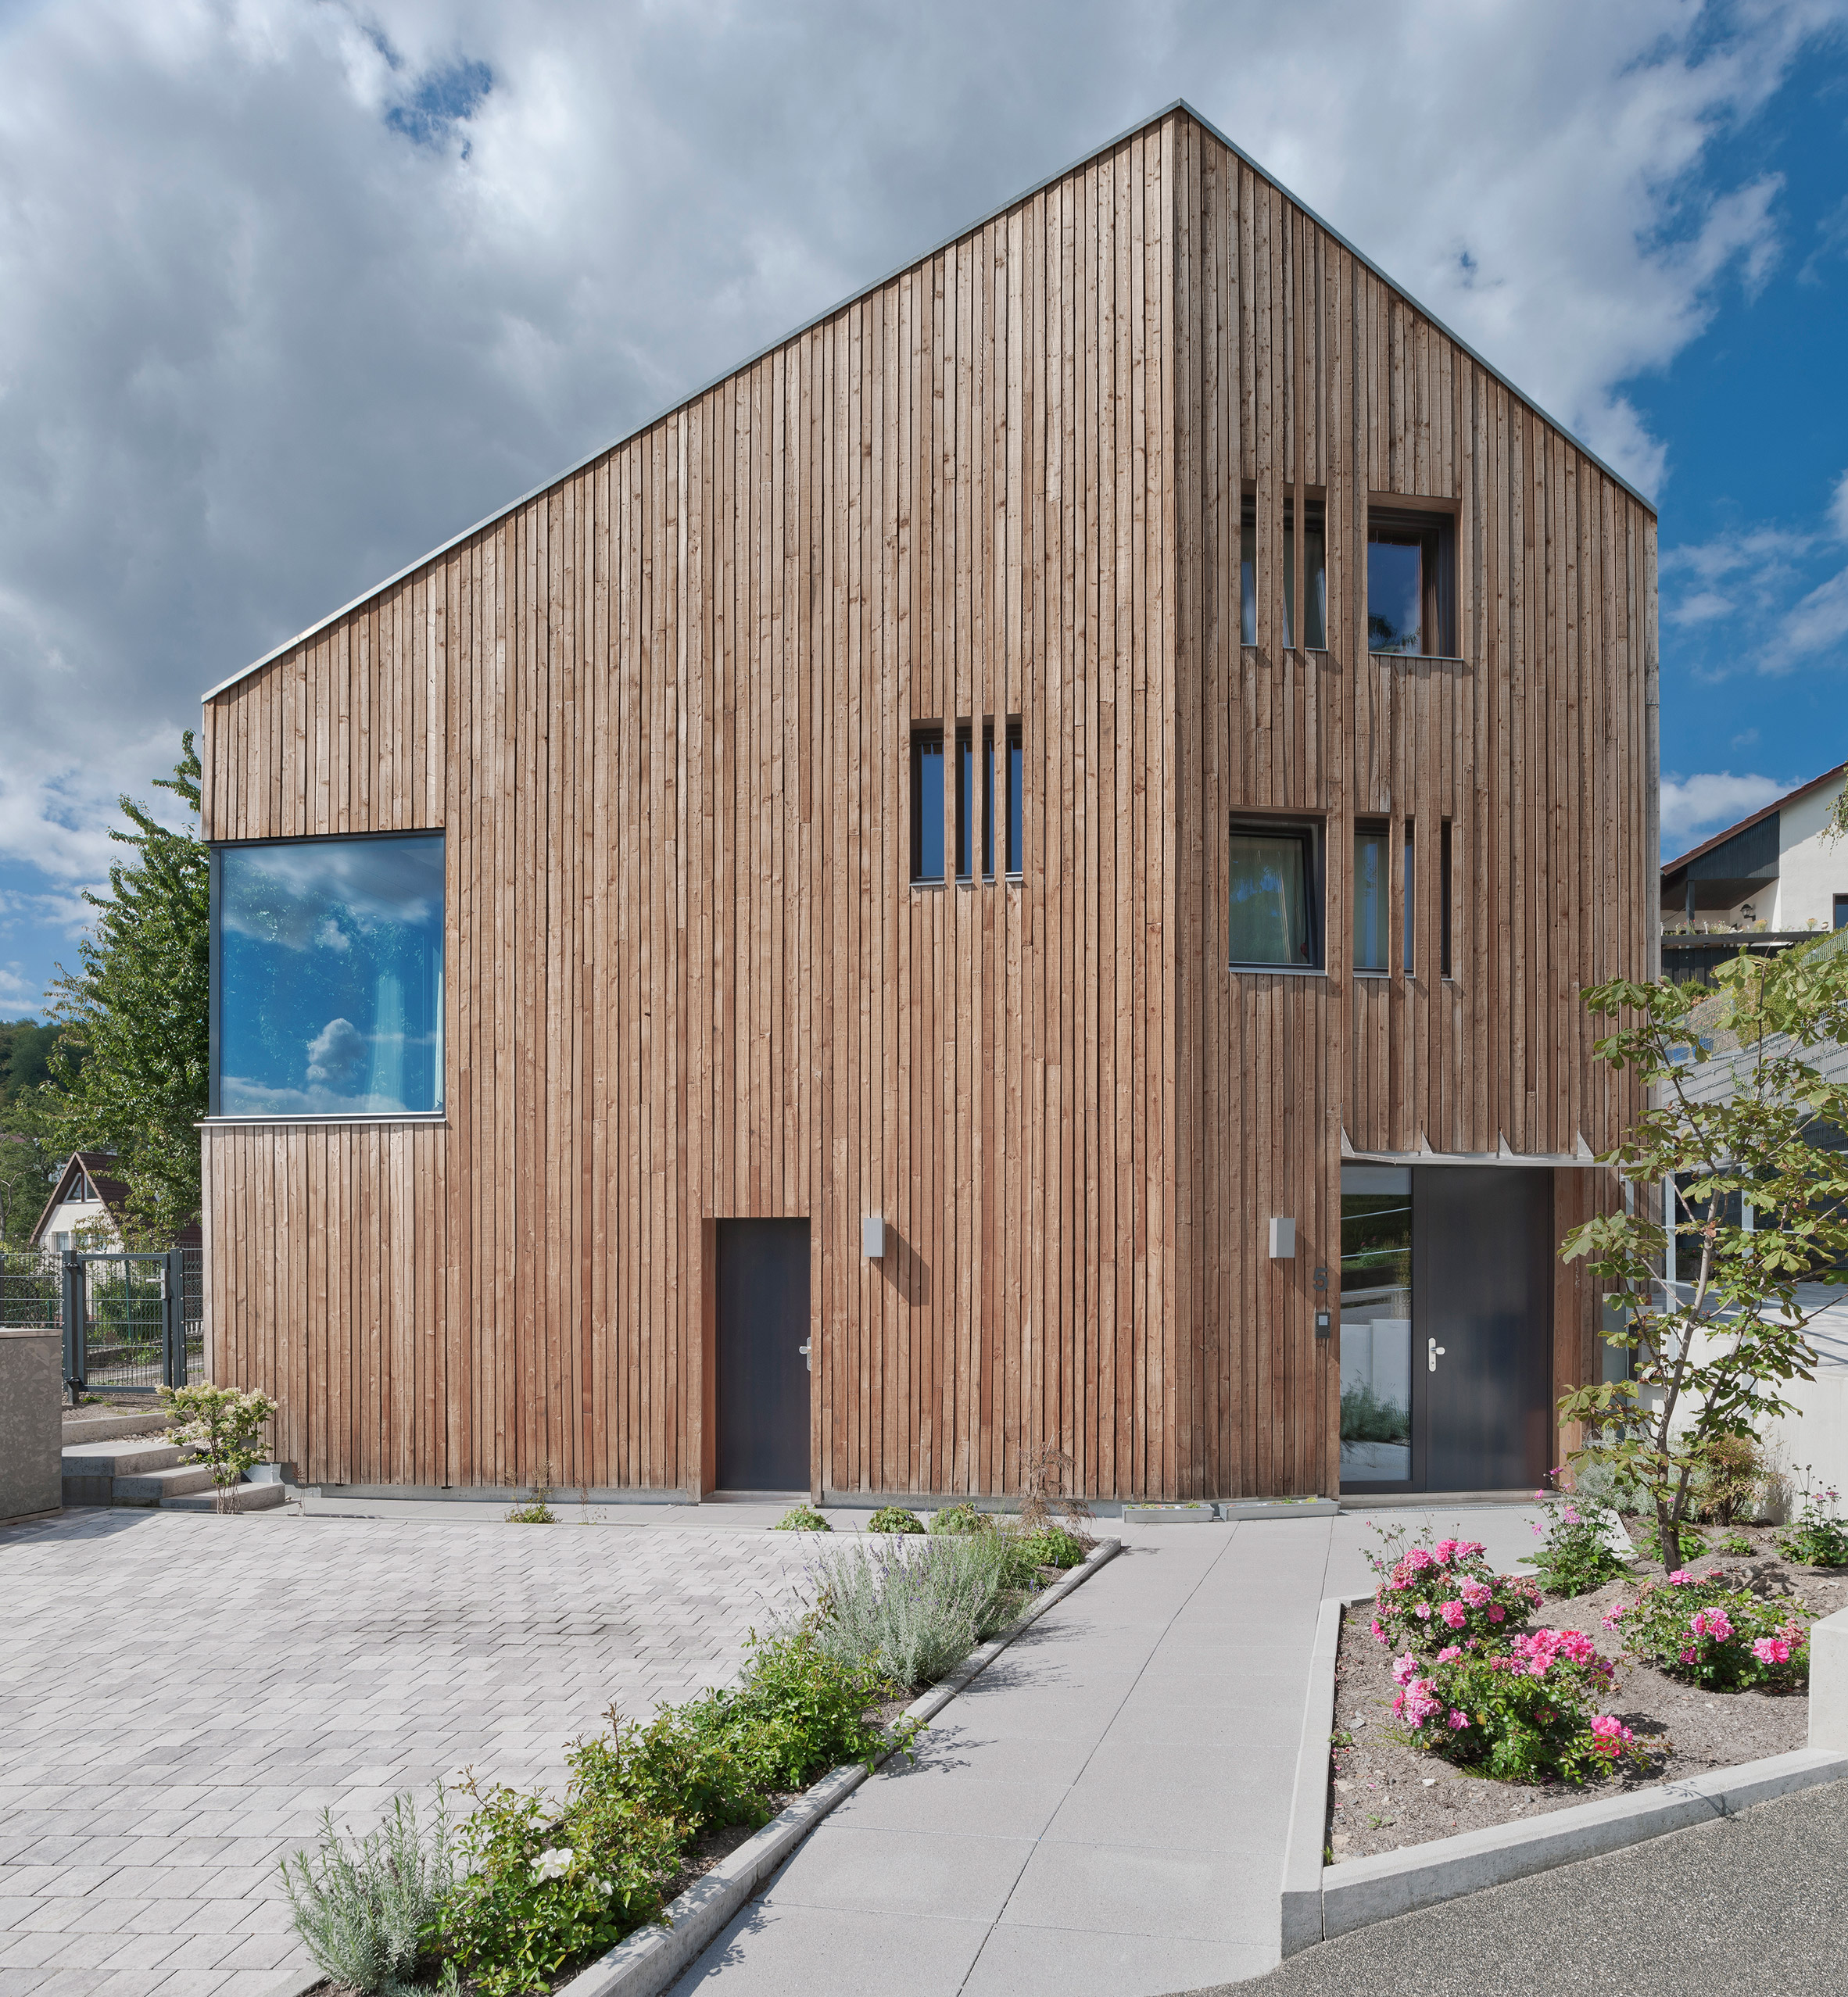 Arklab creates matching larch-clad houses with "the same DNA"